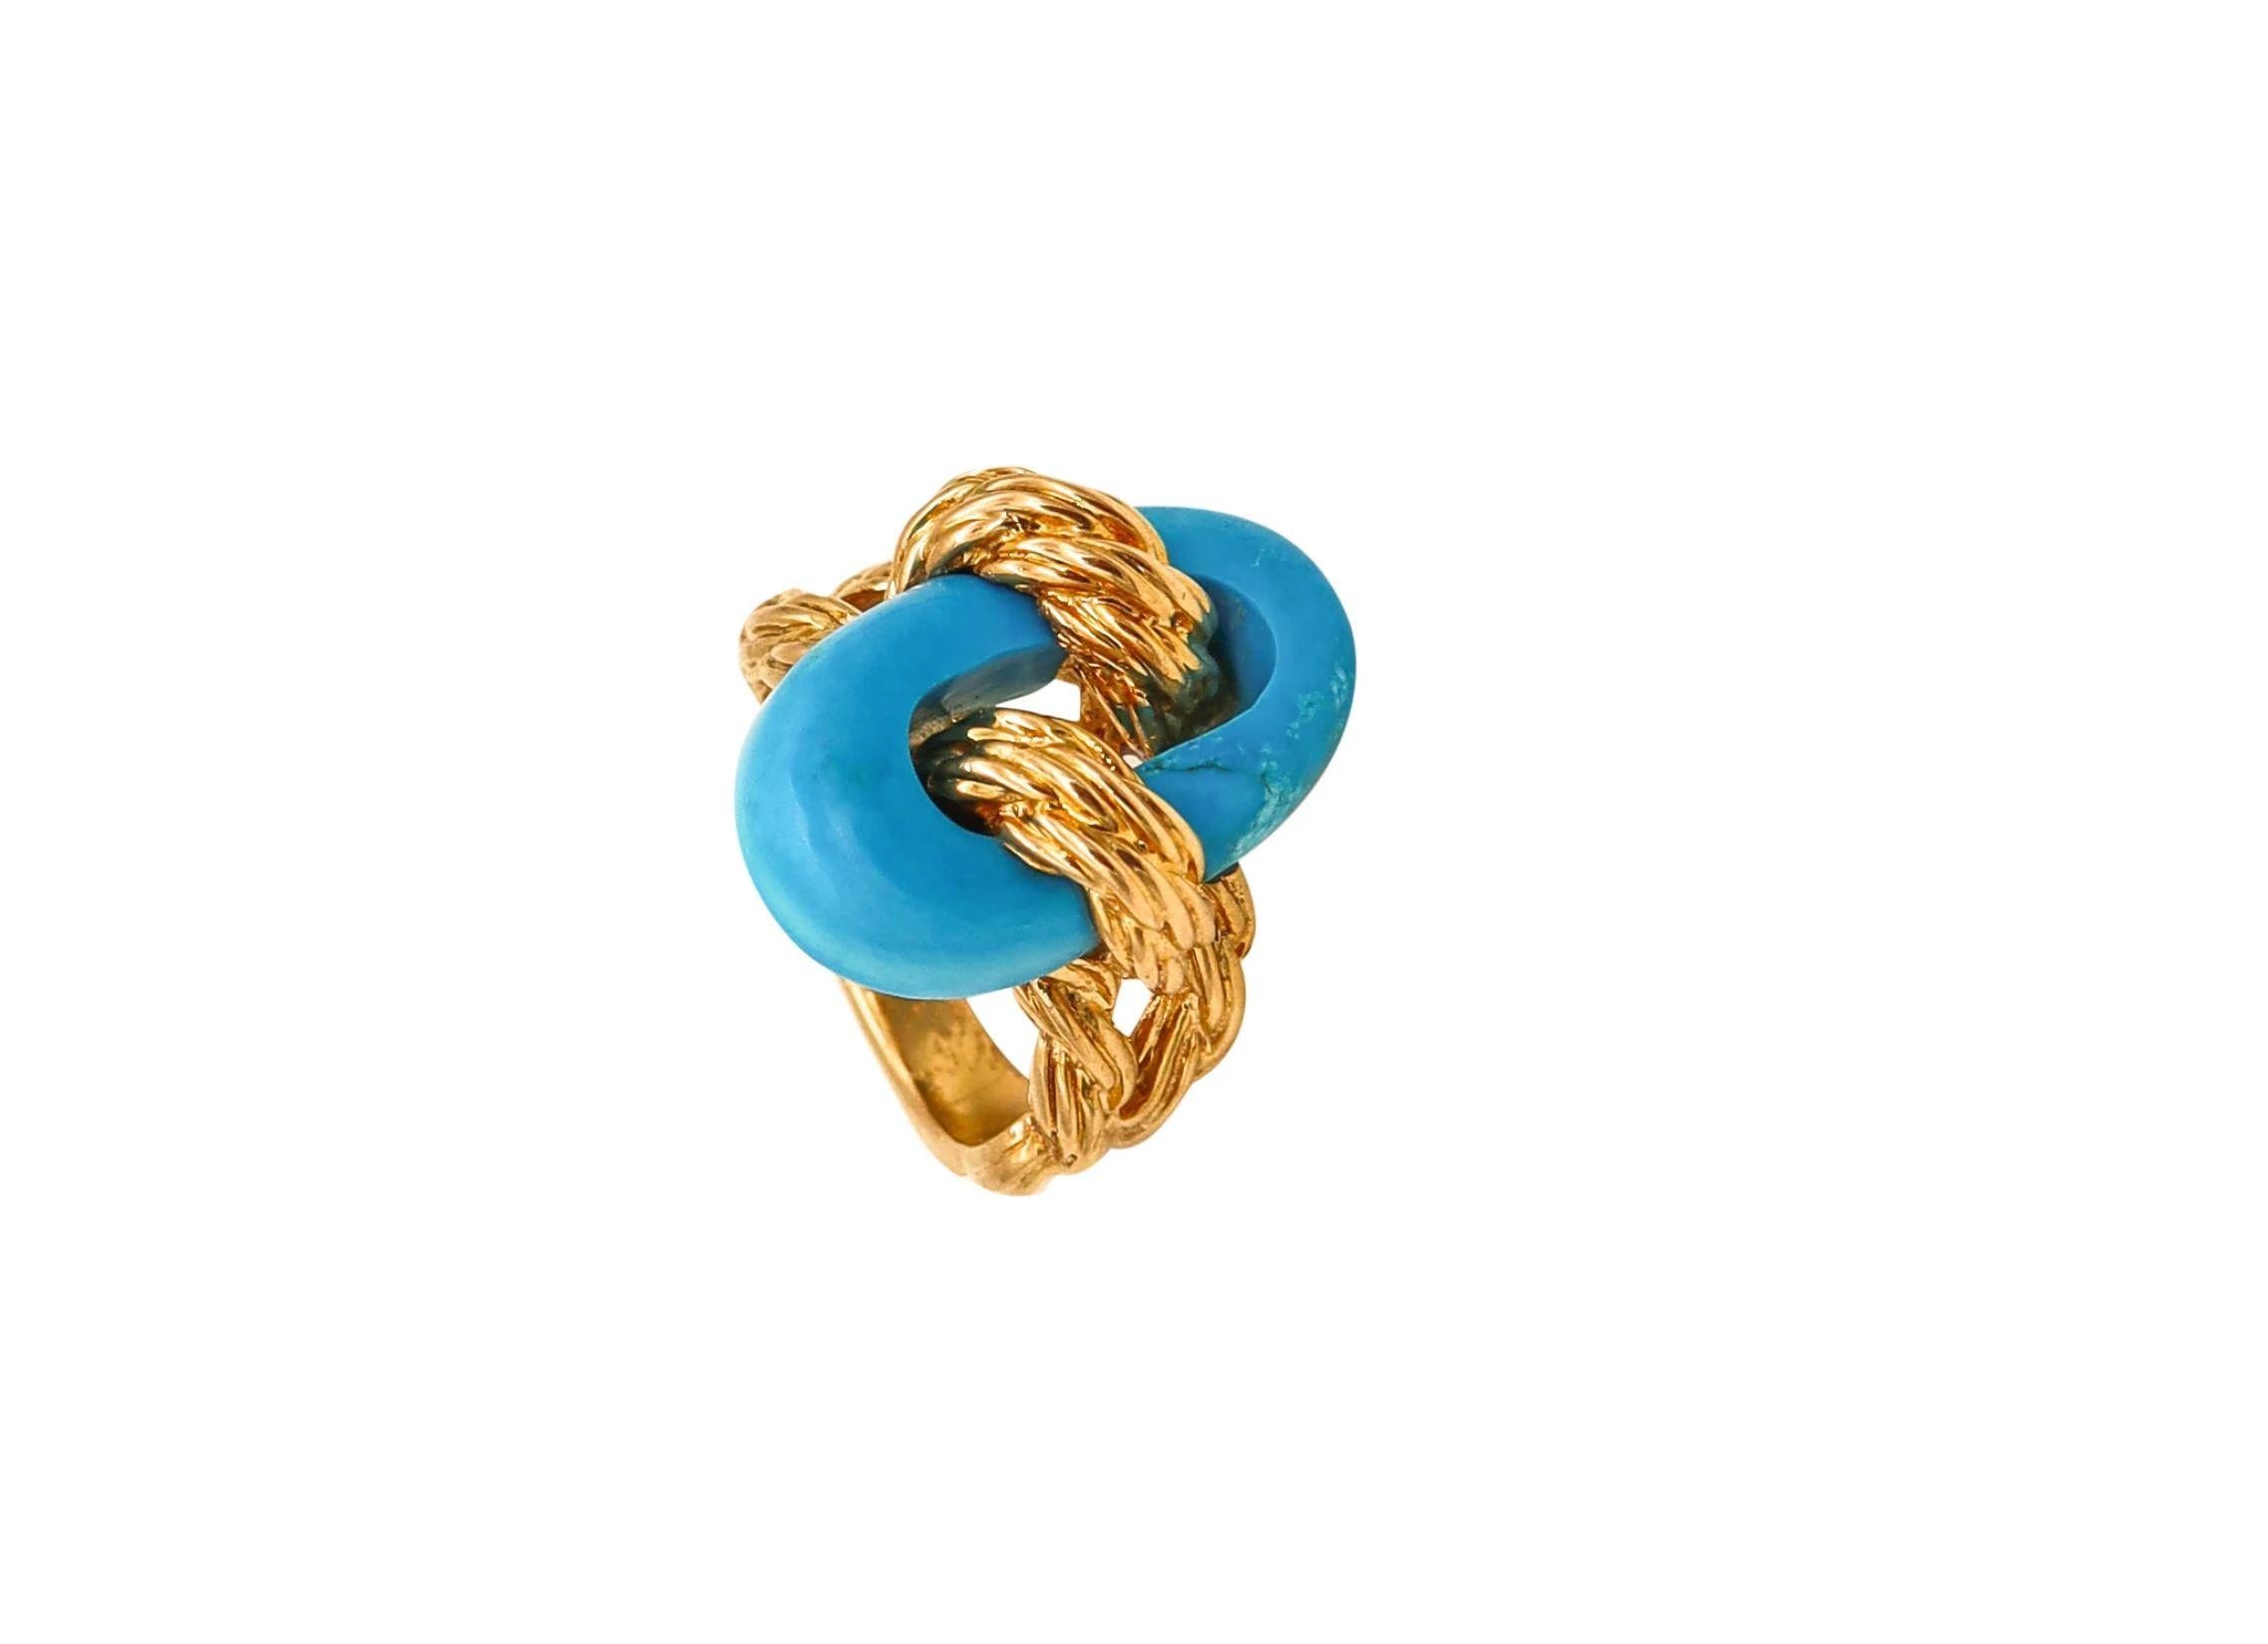 Van Cleef & Arpels 1970 Paris Twisted Ropes Cocktail Ring 18kt Gold Turquoise 2